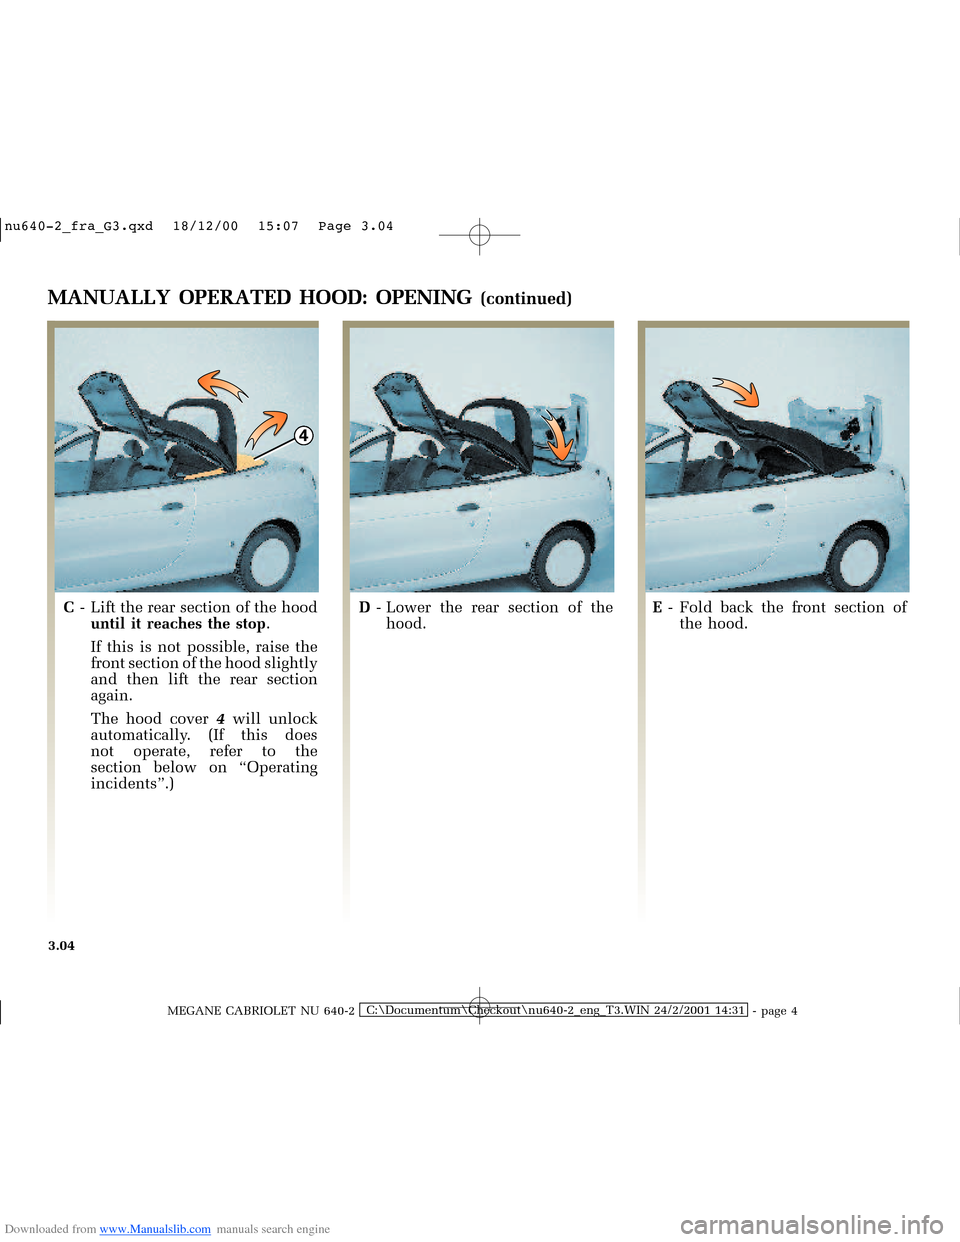 RENAULT MEGANE 2000 X64 / 1.G Owners Manual Downloaded from www.Manualslib.com manuals search engine 4
�Q�X������B�I�U�D�B�*���T�[�G� � ��������� � ������ � �3�D�J�H� ����
MEGANE CABRIOLET NU 640-2C:\Documentum\Ch